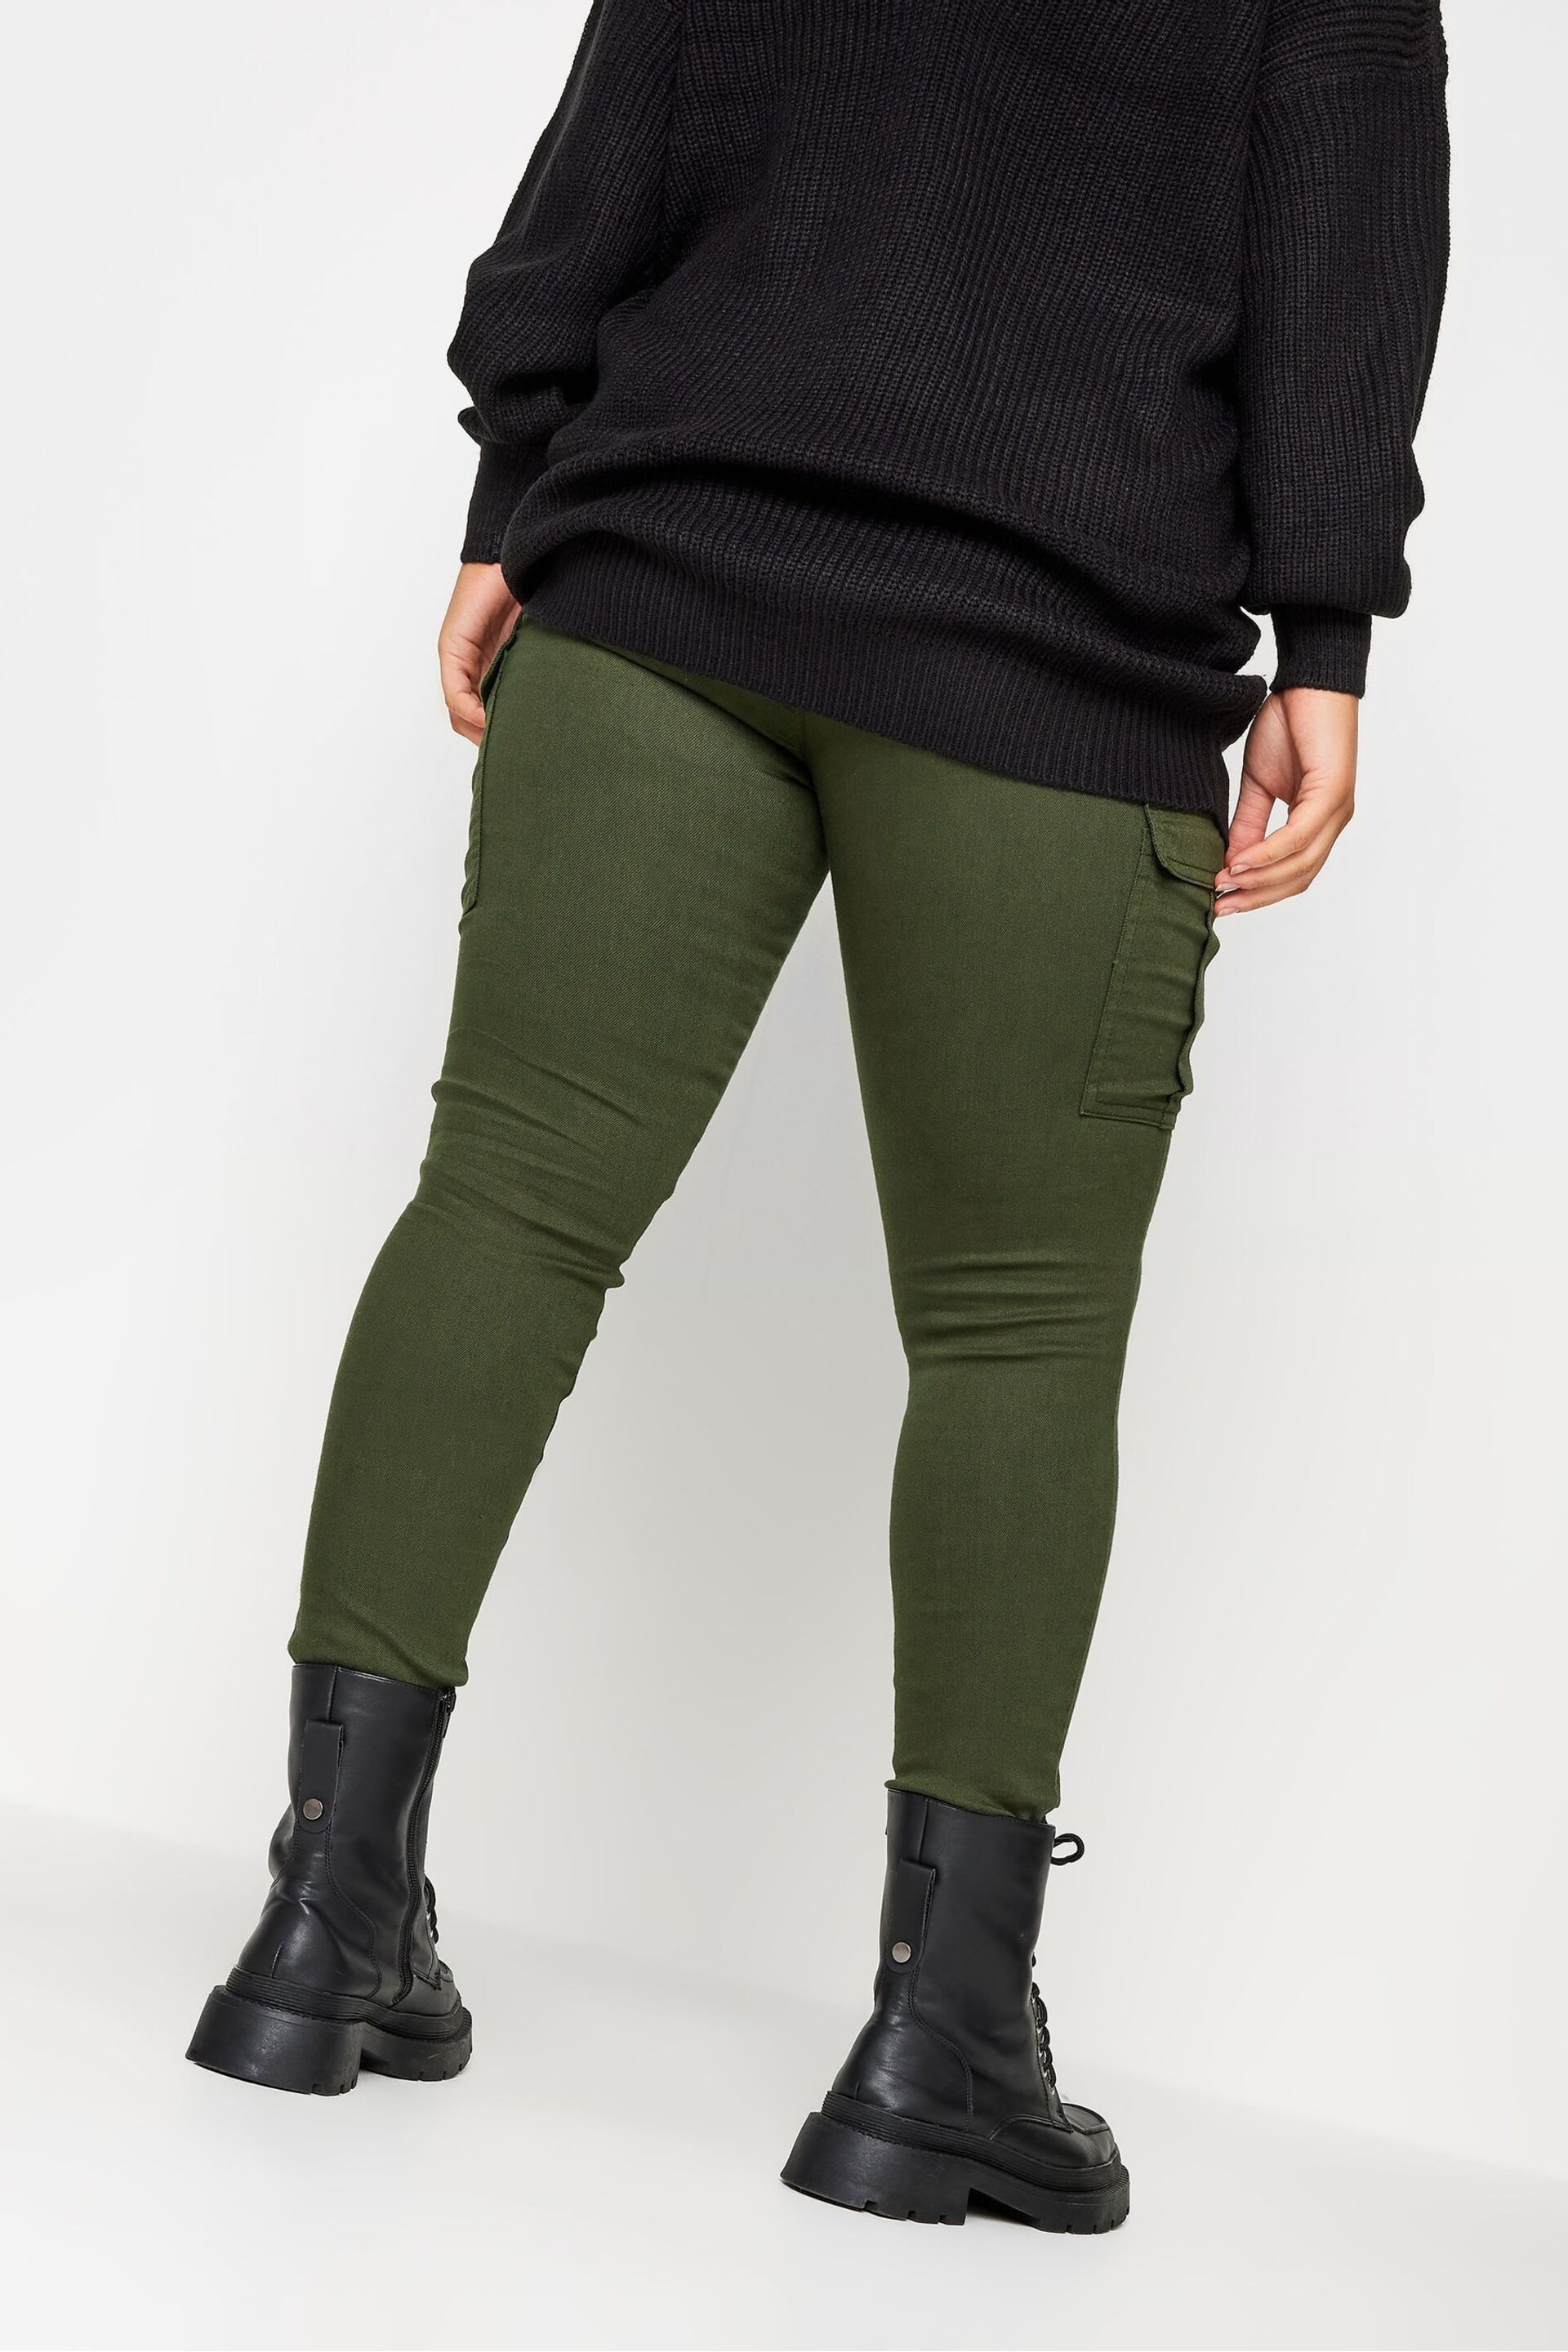 Yours Curve Green Cargo Grace Jeggings - Image 3 of 4